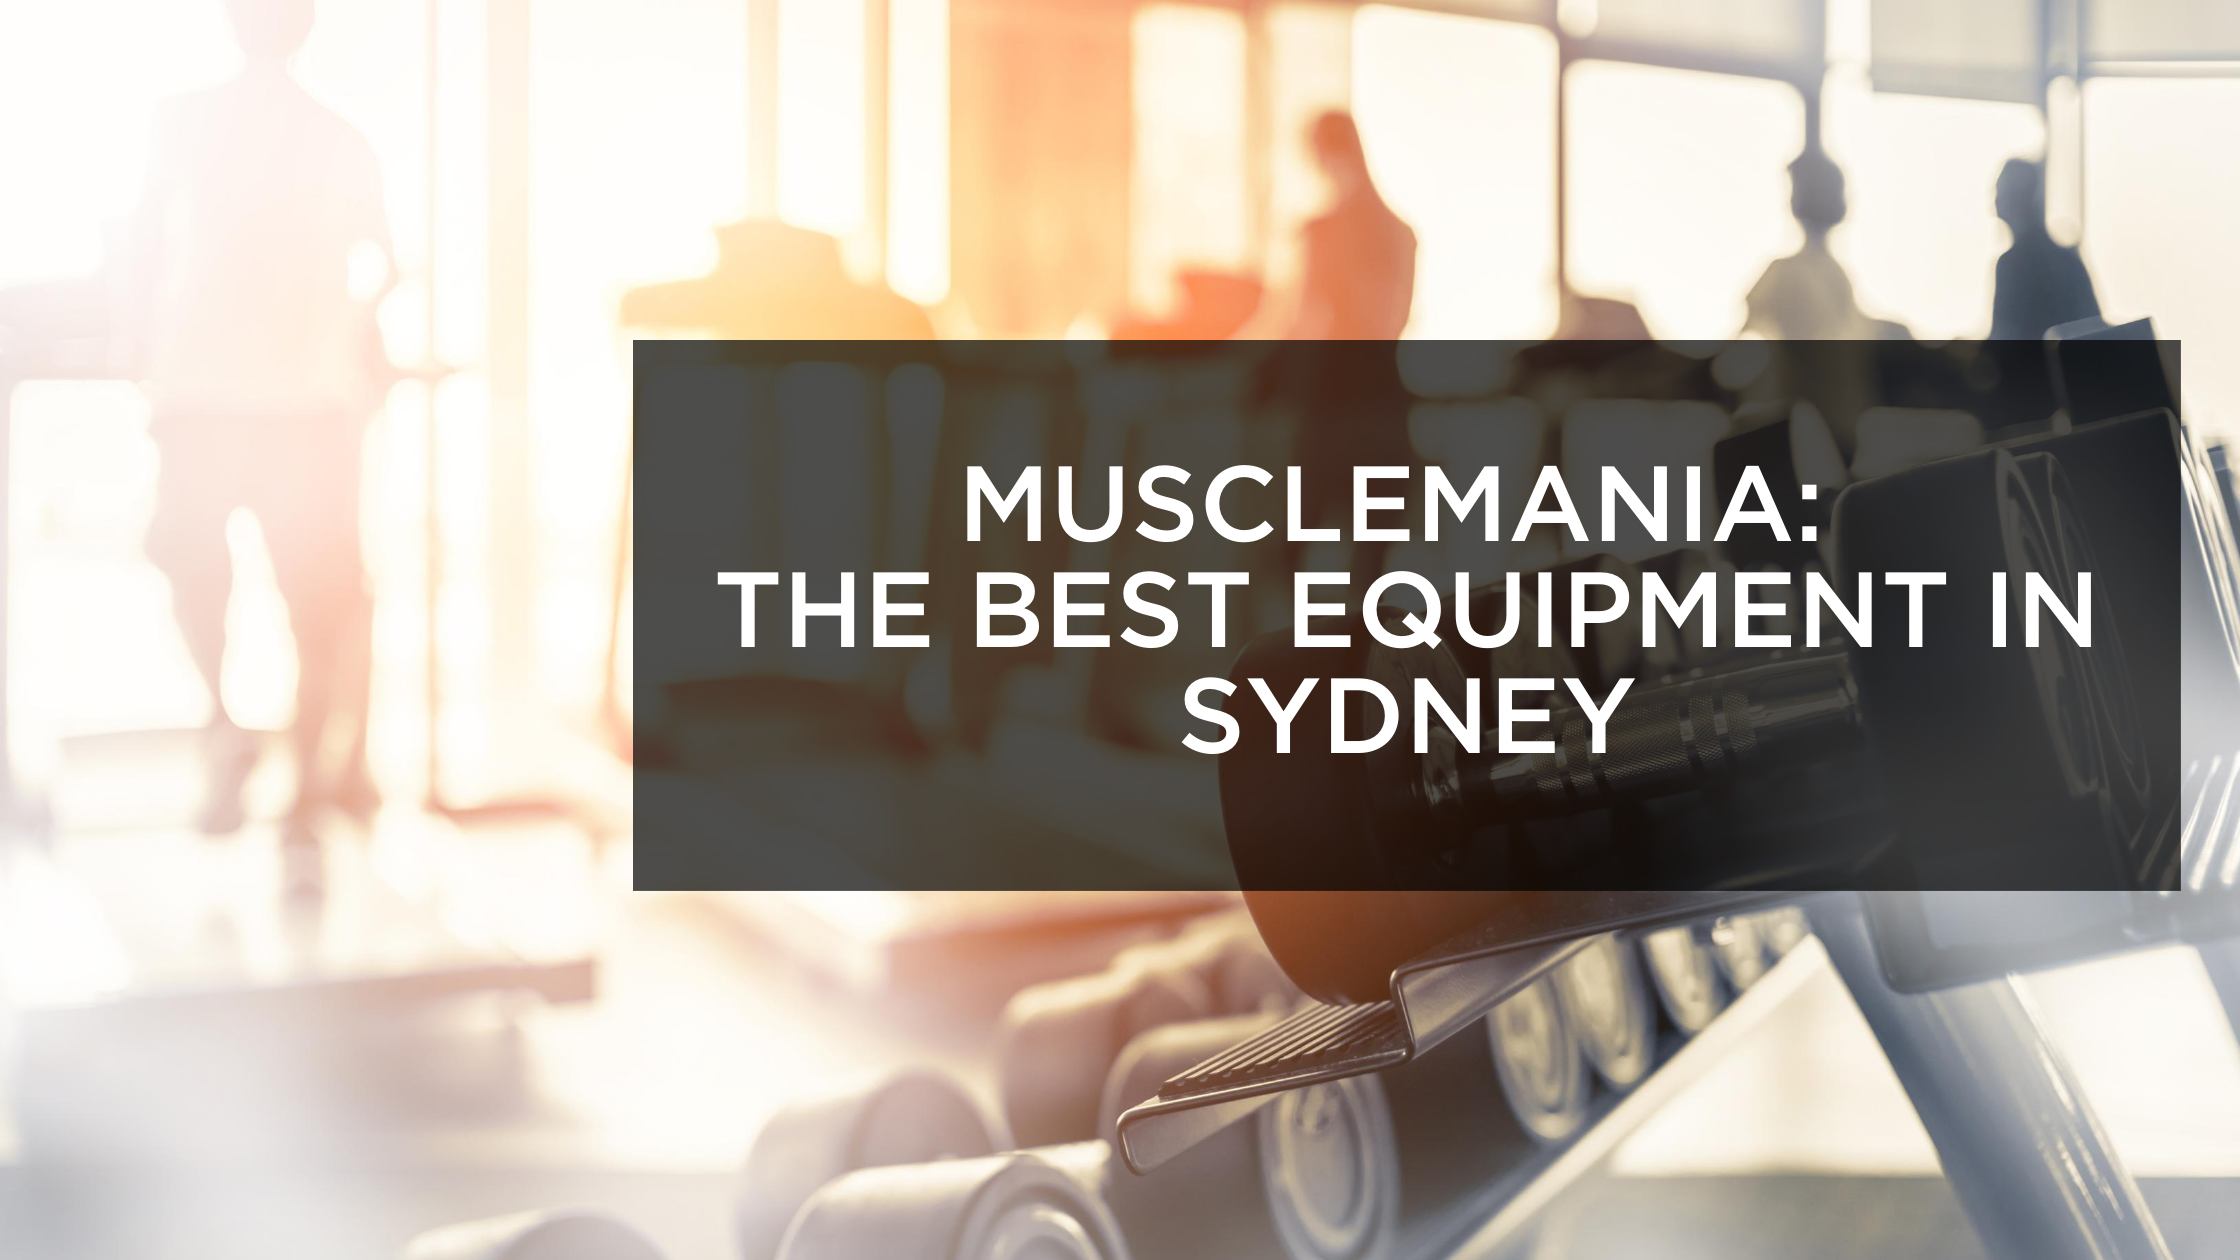 MUSCLE MANIA: THE BEST GYM EQUIPMENT IN SYDNEY Musclemania Fitness MegaStore